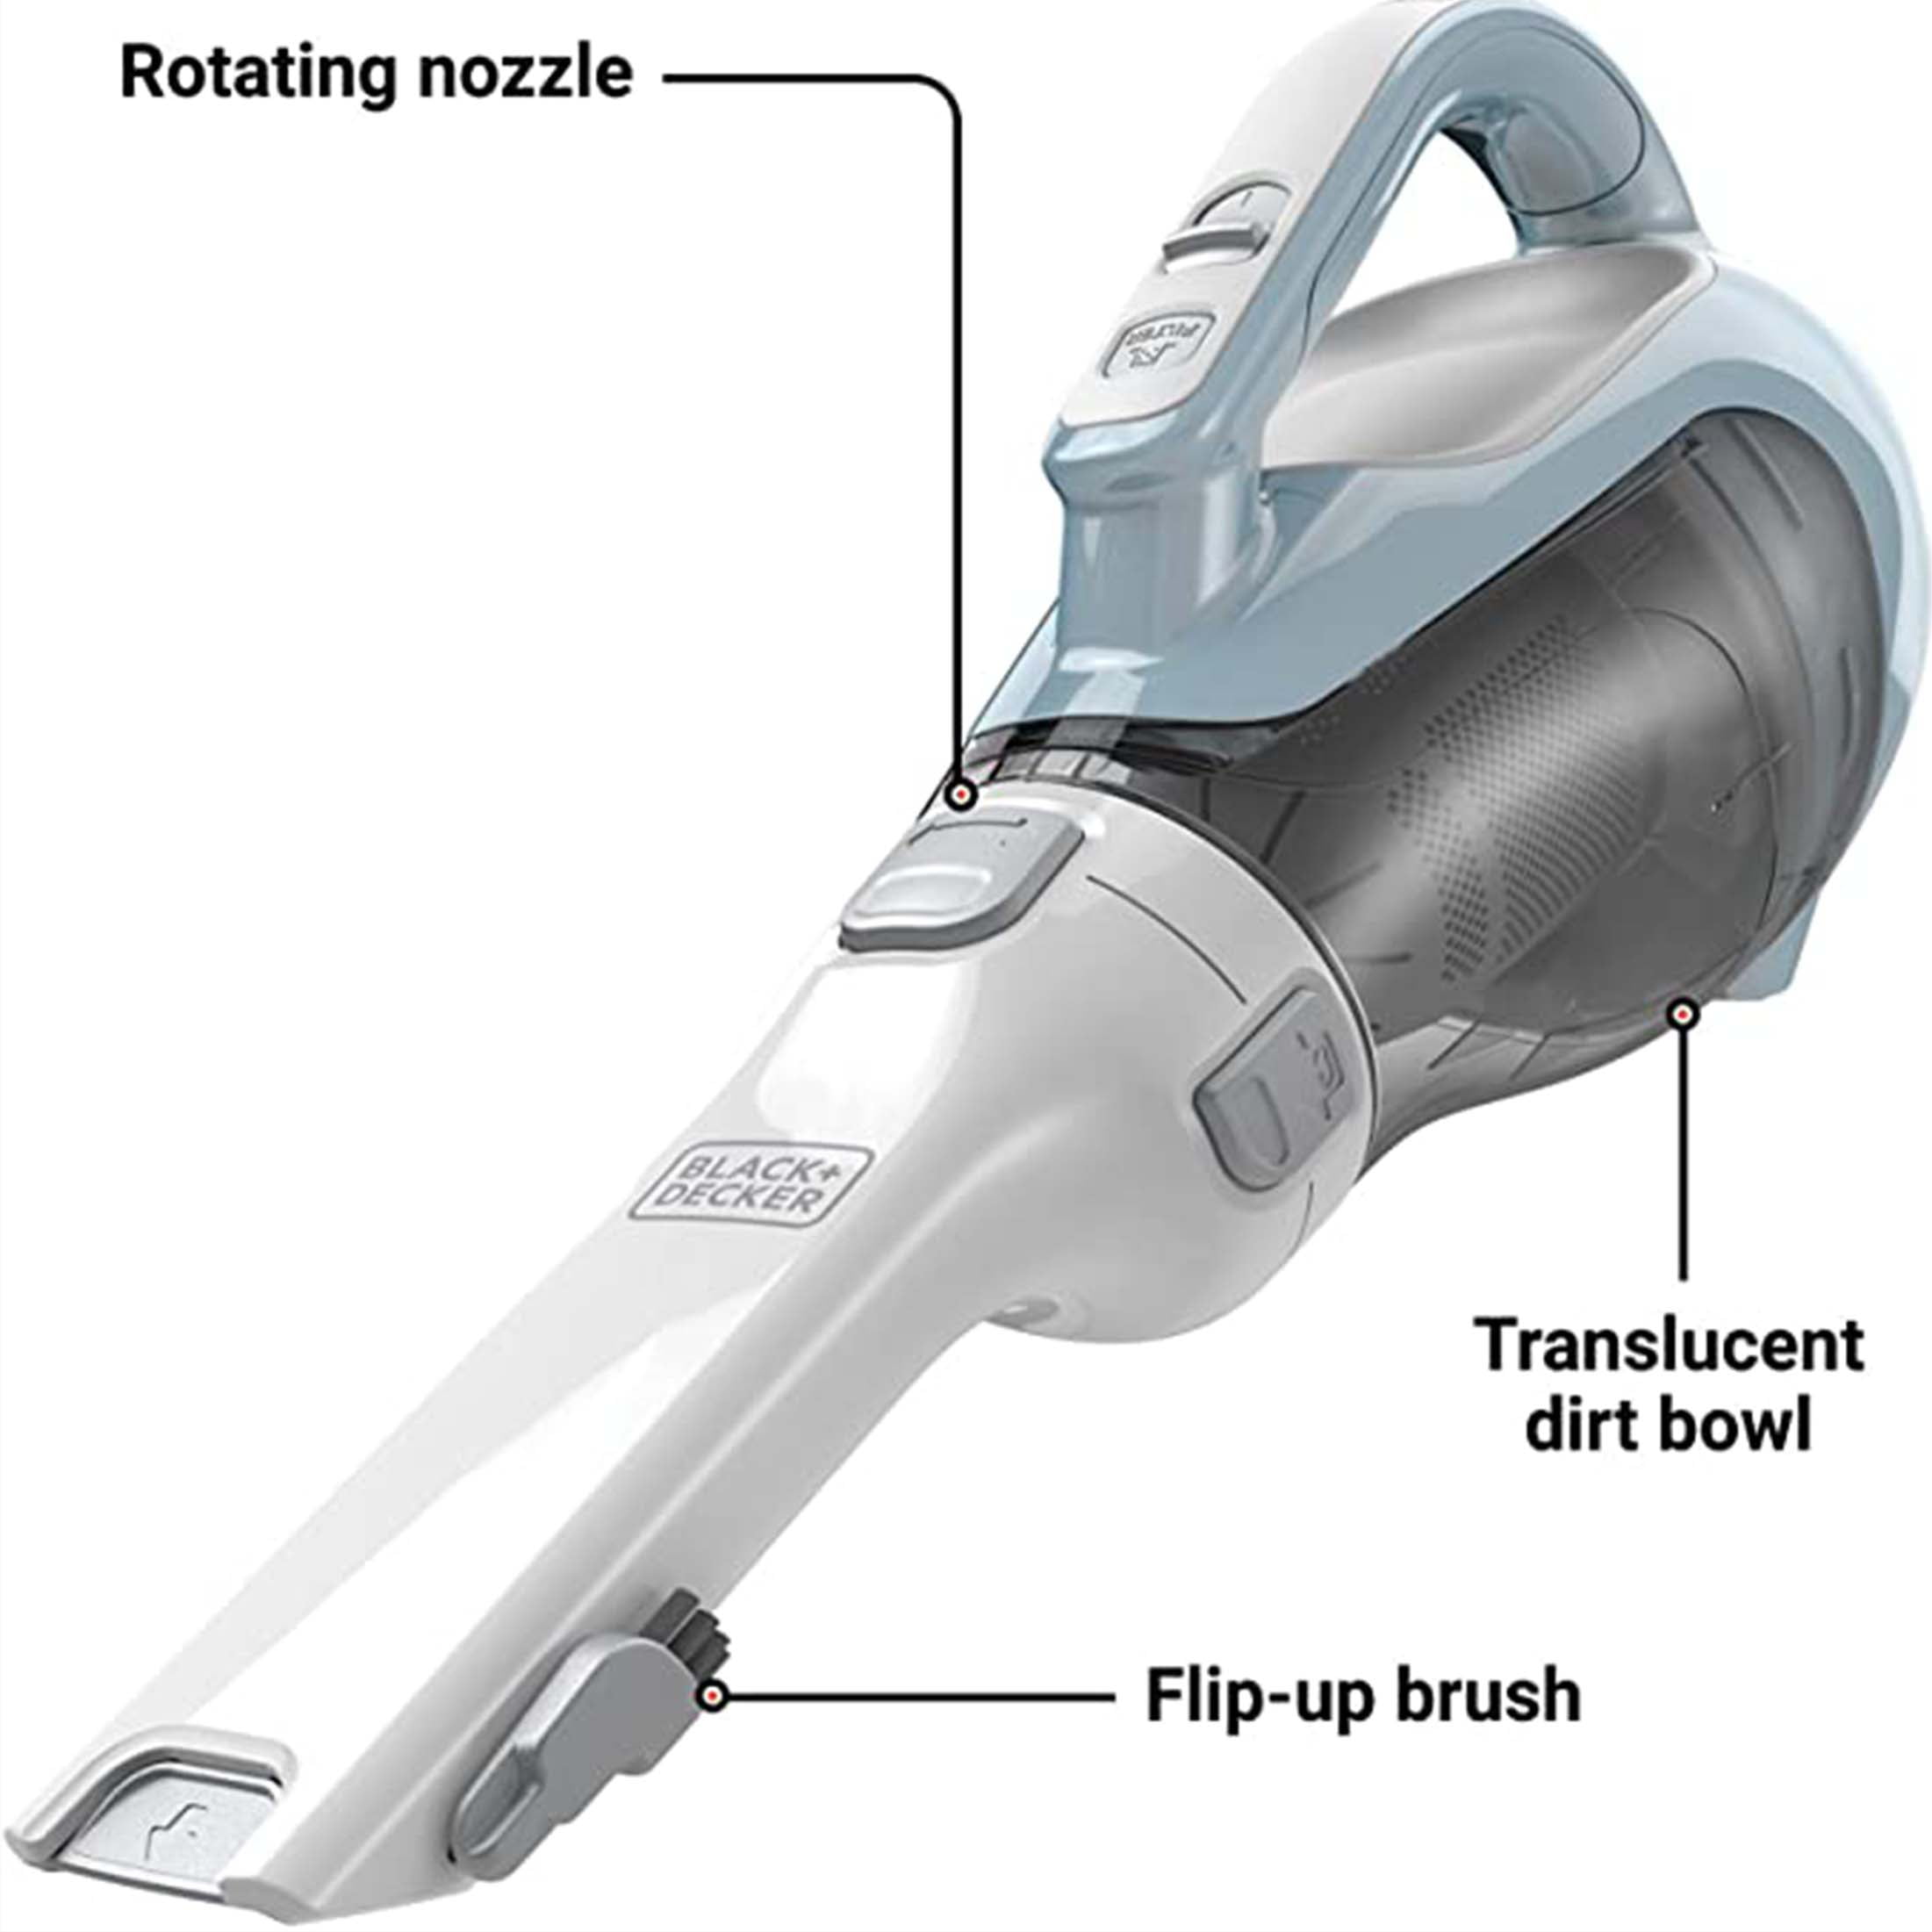 Black & Decker Dustbuster Cordless Hand Vac Model DB200 With Extra